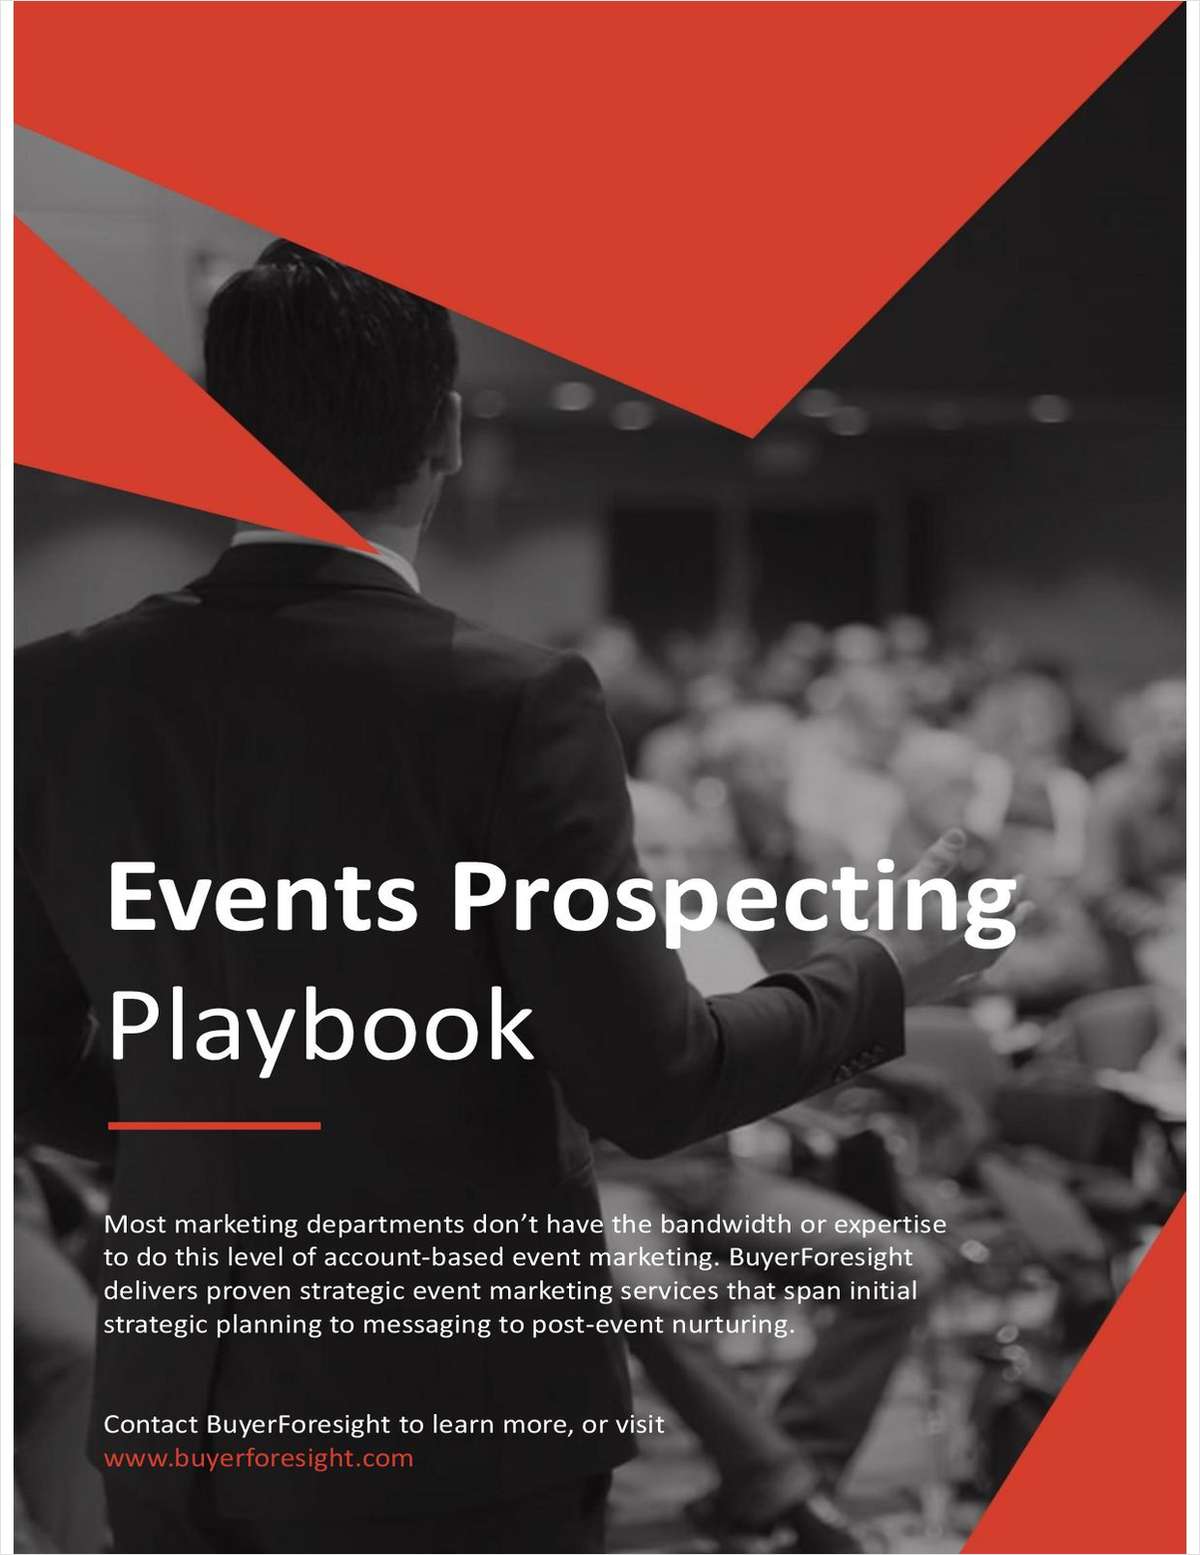 Events Prospecting Playbook